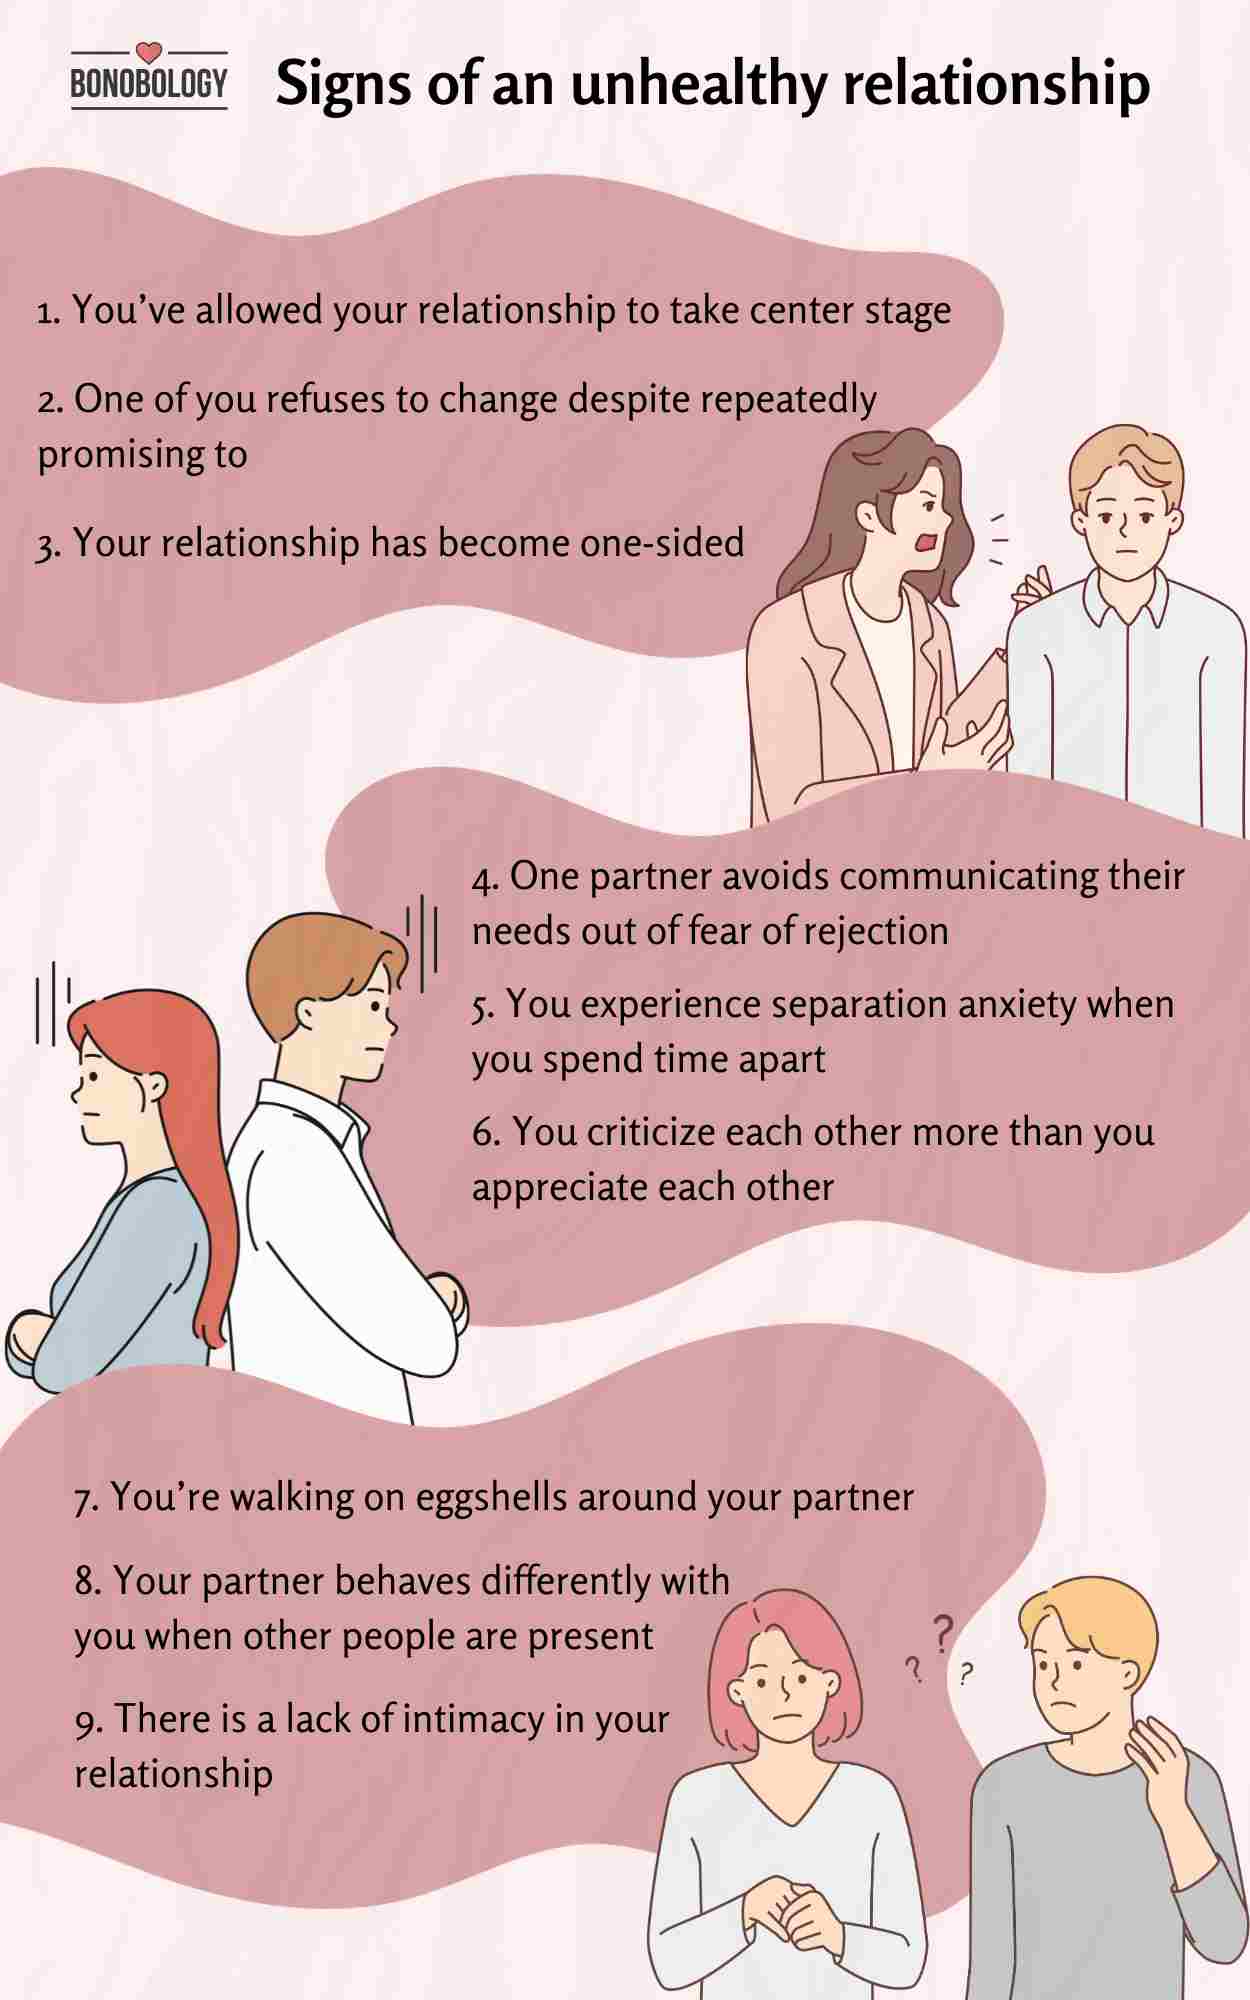 Infographic for signs of an unhealthy relationship